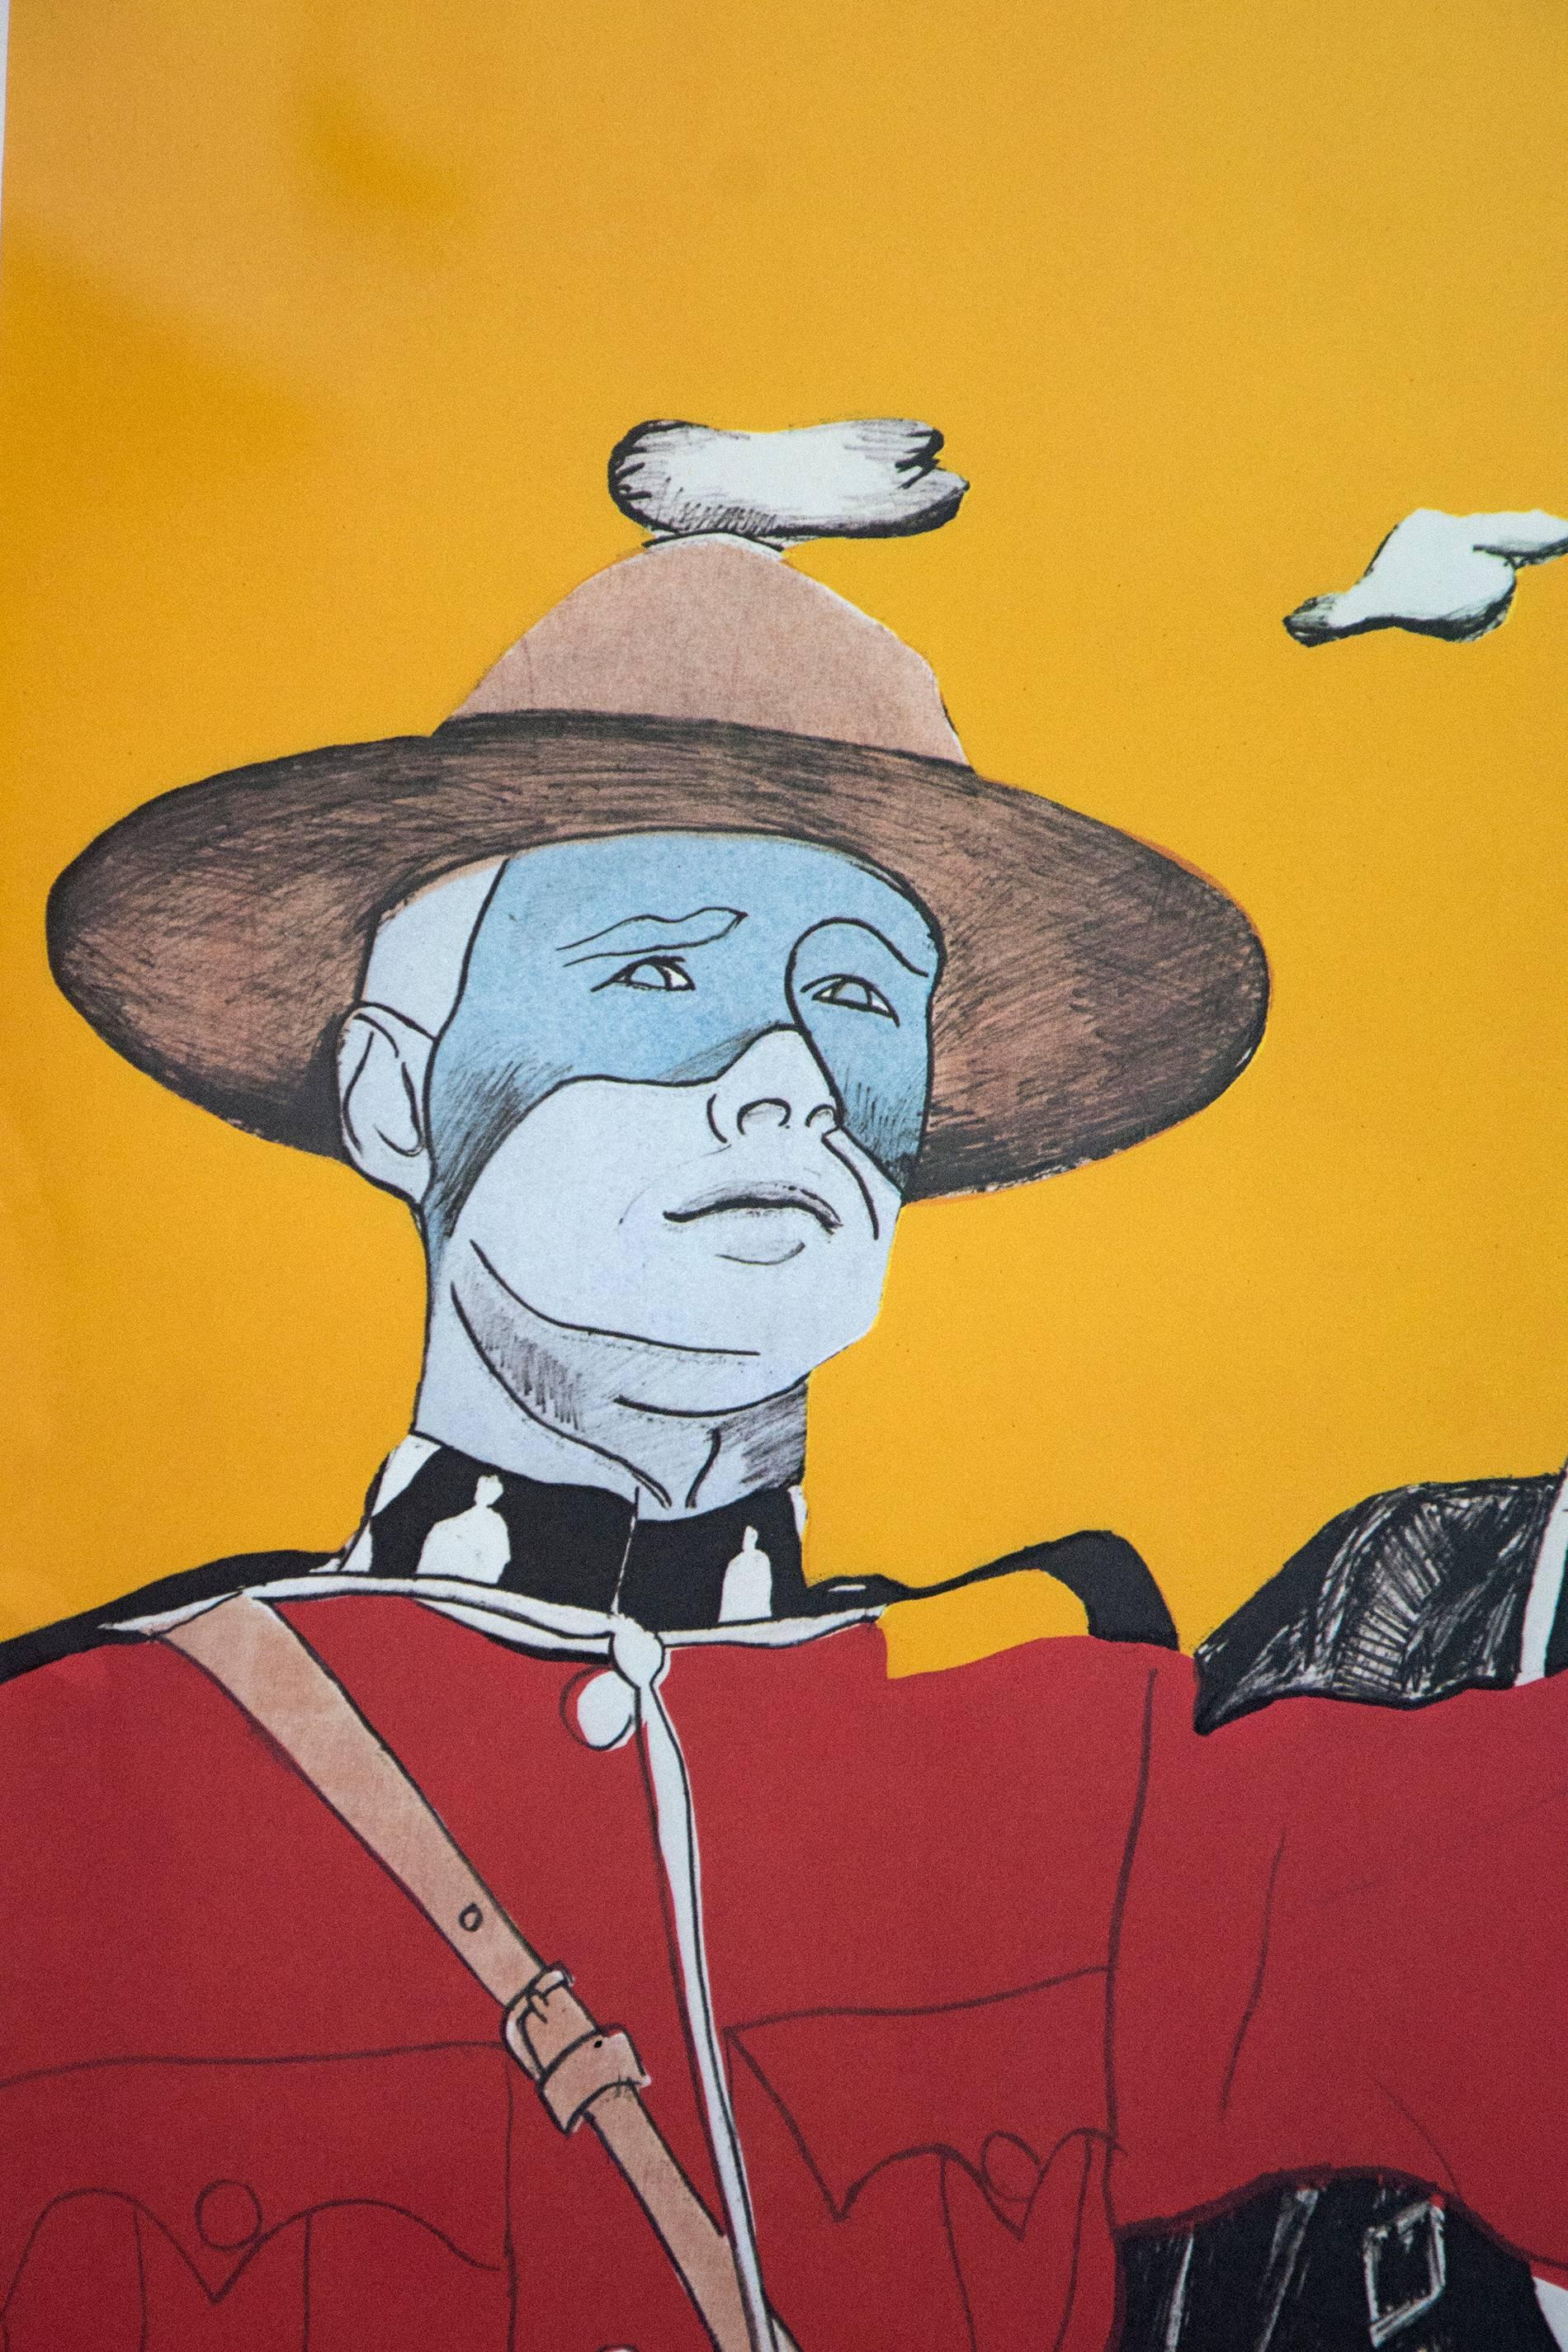 Nobility Obliges 3/10 - pop-art, Canadiana, iconic, contemporary, giclee print - Orange Figurative Print by Charles Pachter